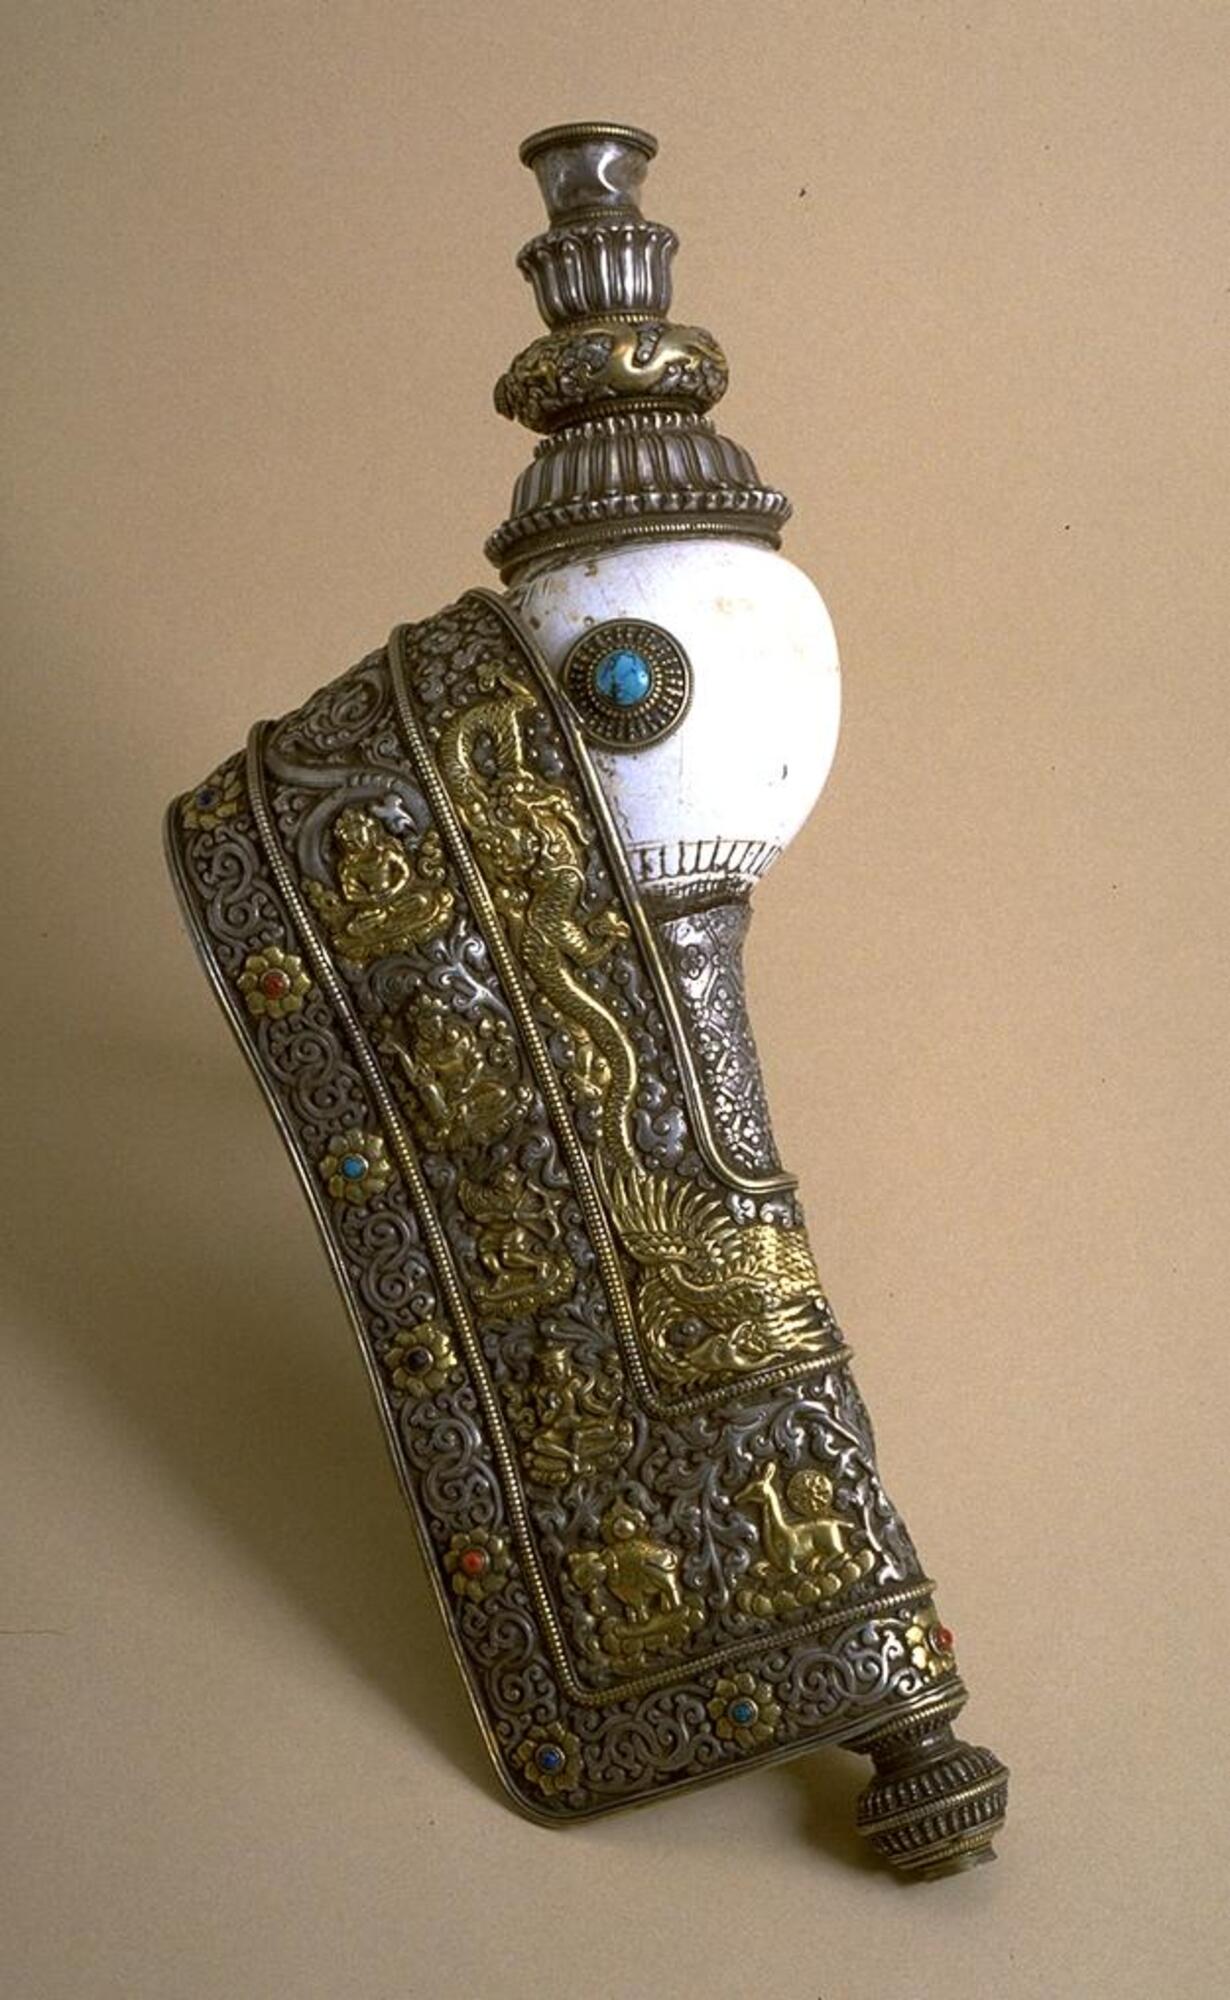 An elaborately decorated conch shell trumpet, with extensions and a side chamber made from silver, inlaid with other precious metals and semi-precious stones of turquoise, lapiz lazuli, and mountain coral.